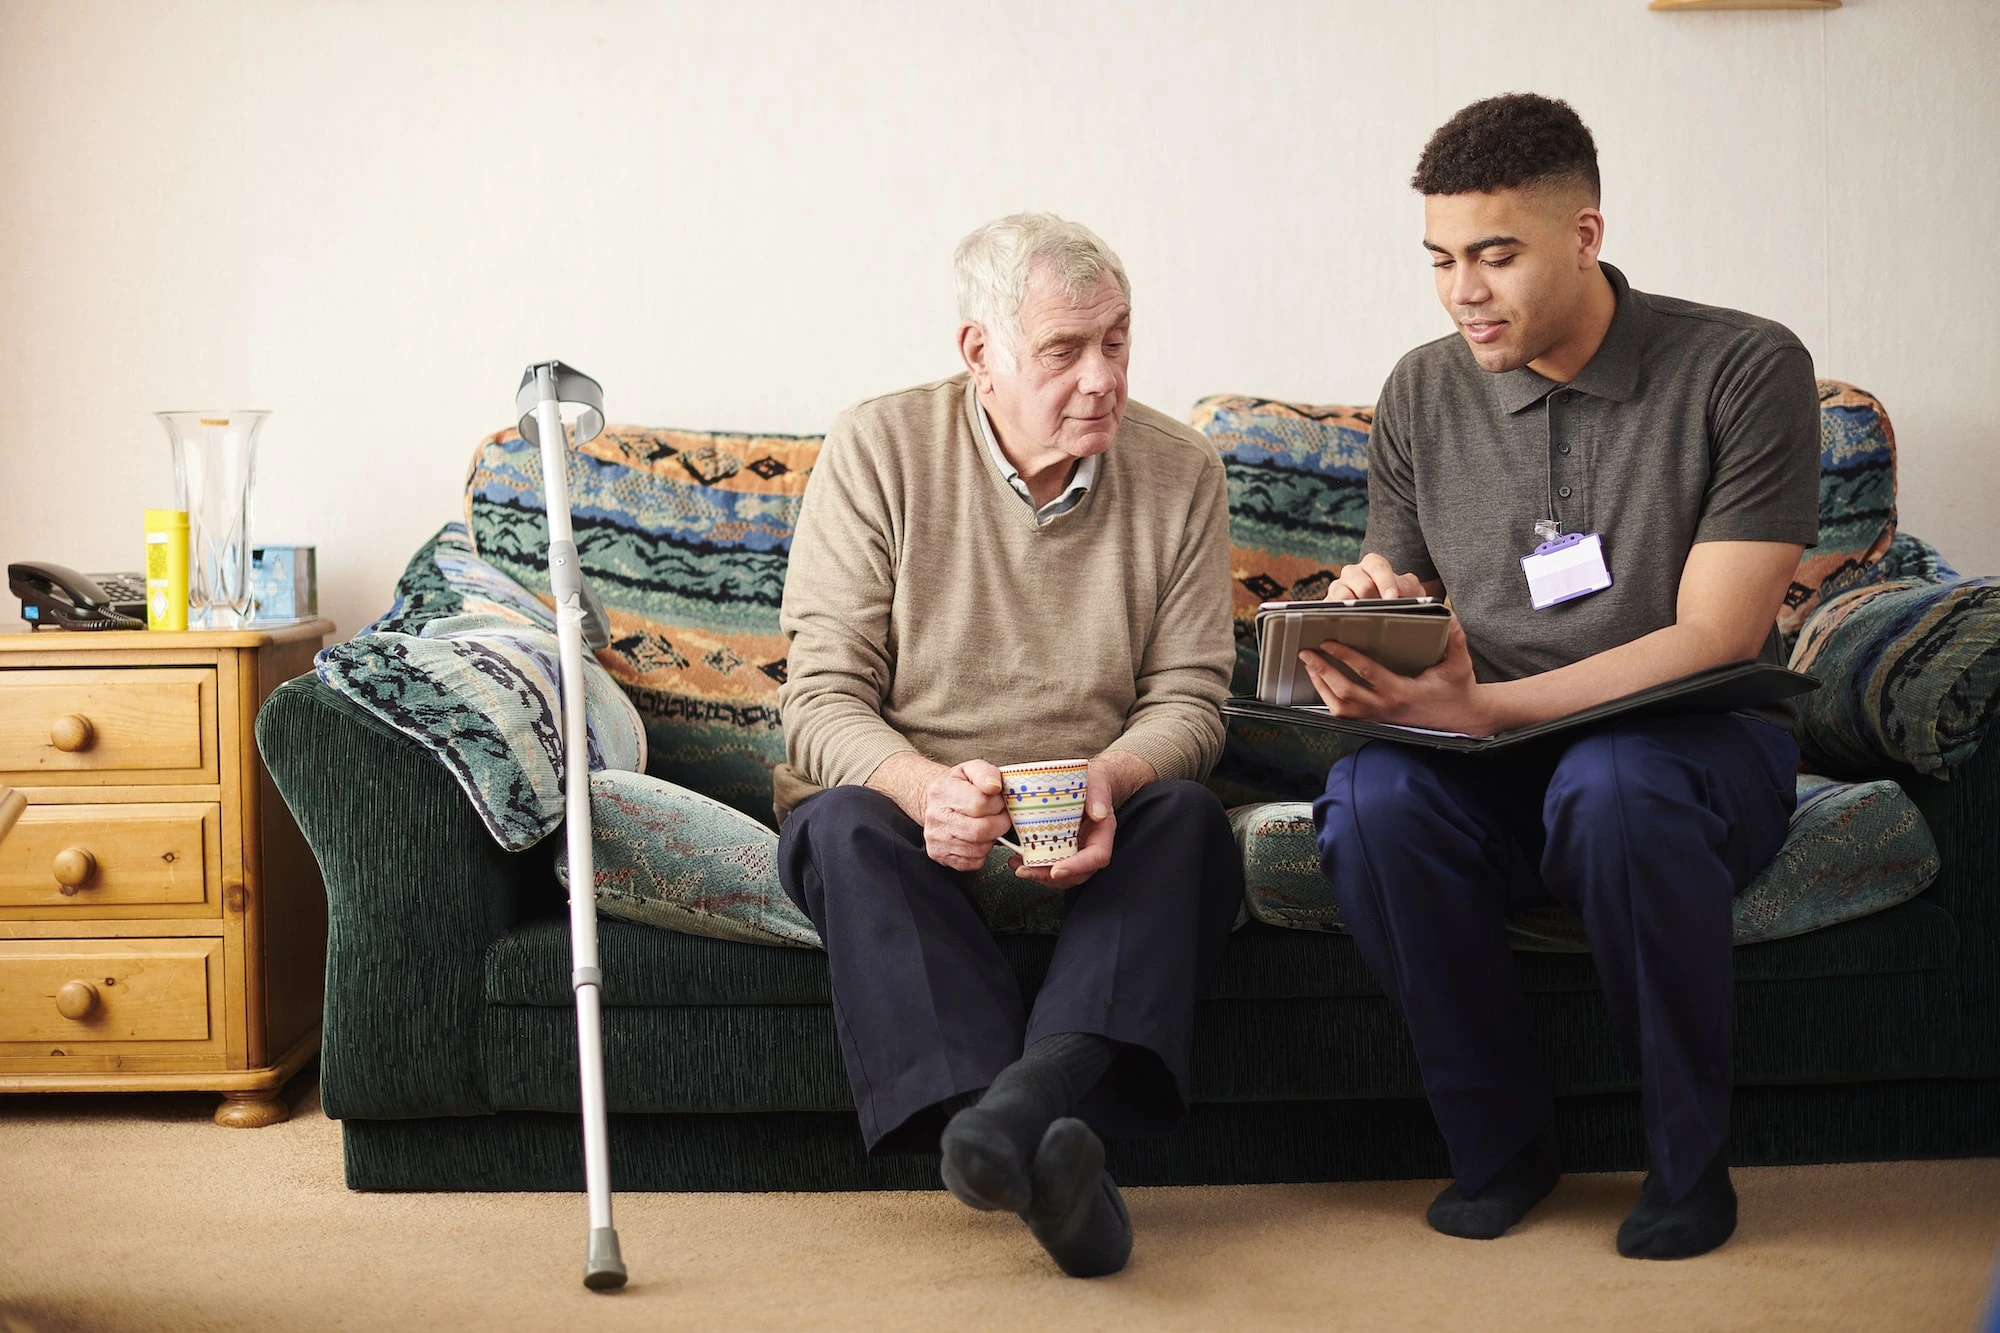 Photograph of a social worker speaking with an elderly man.